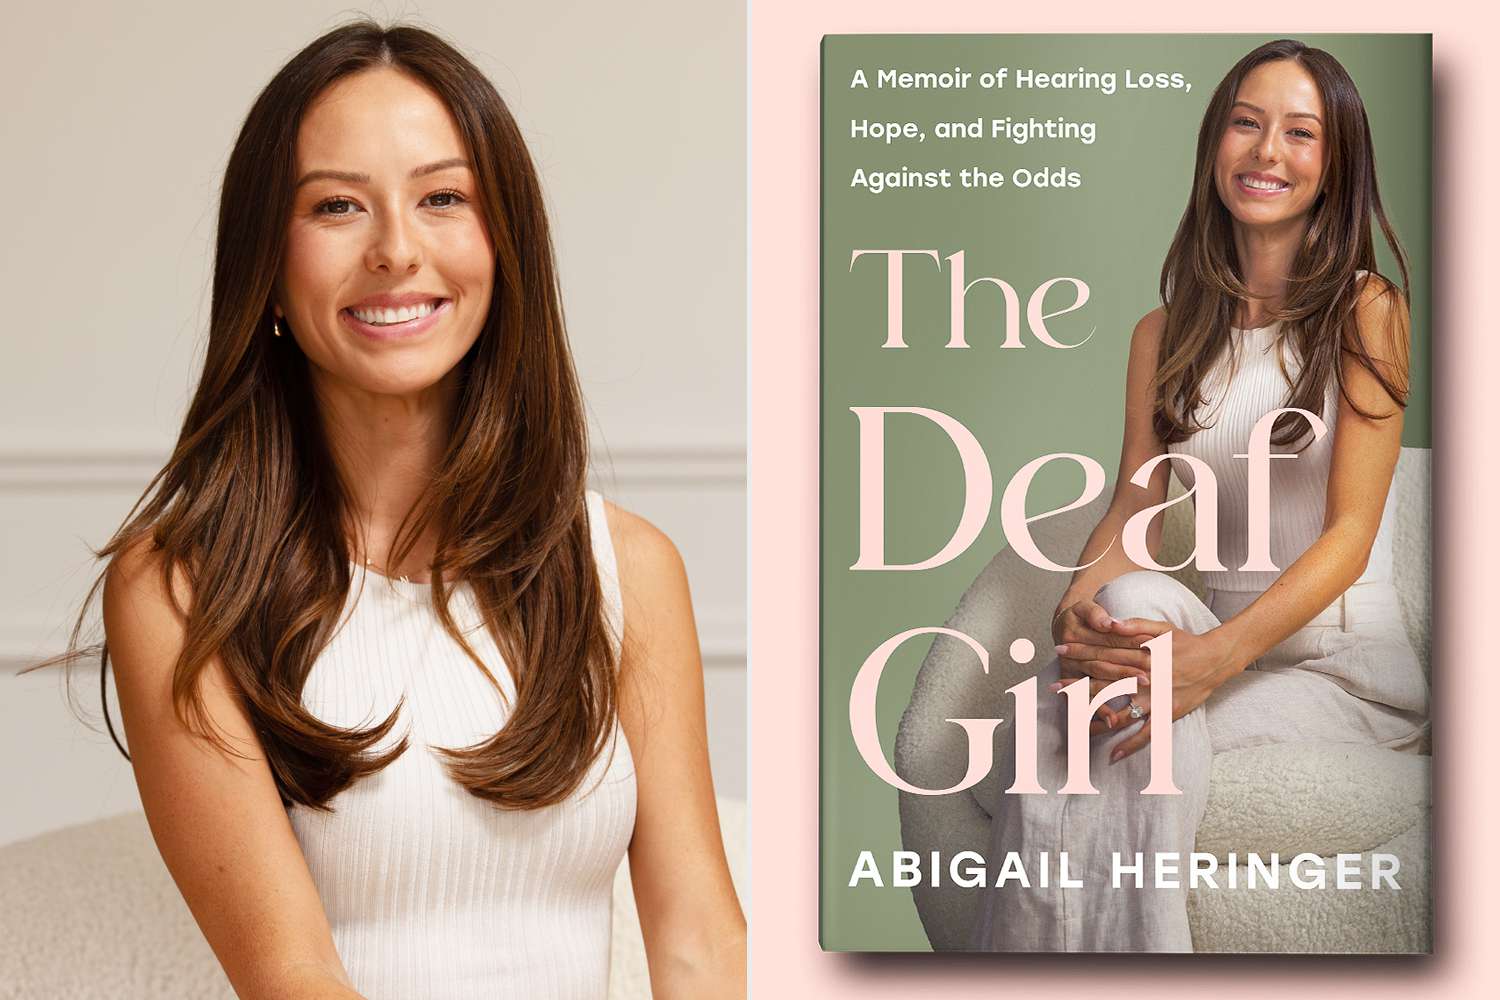 “The Bachelor”'s Abigail Heringer Tells Her Story of 'Hearing Loss and Hope' in New Memoir “The Deaf Girl” (Exclusive)